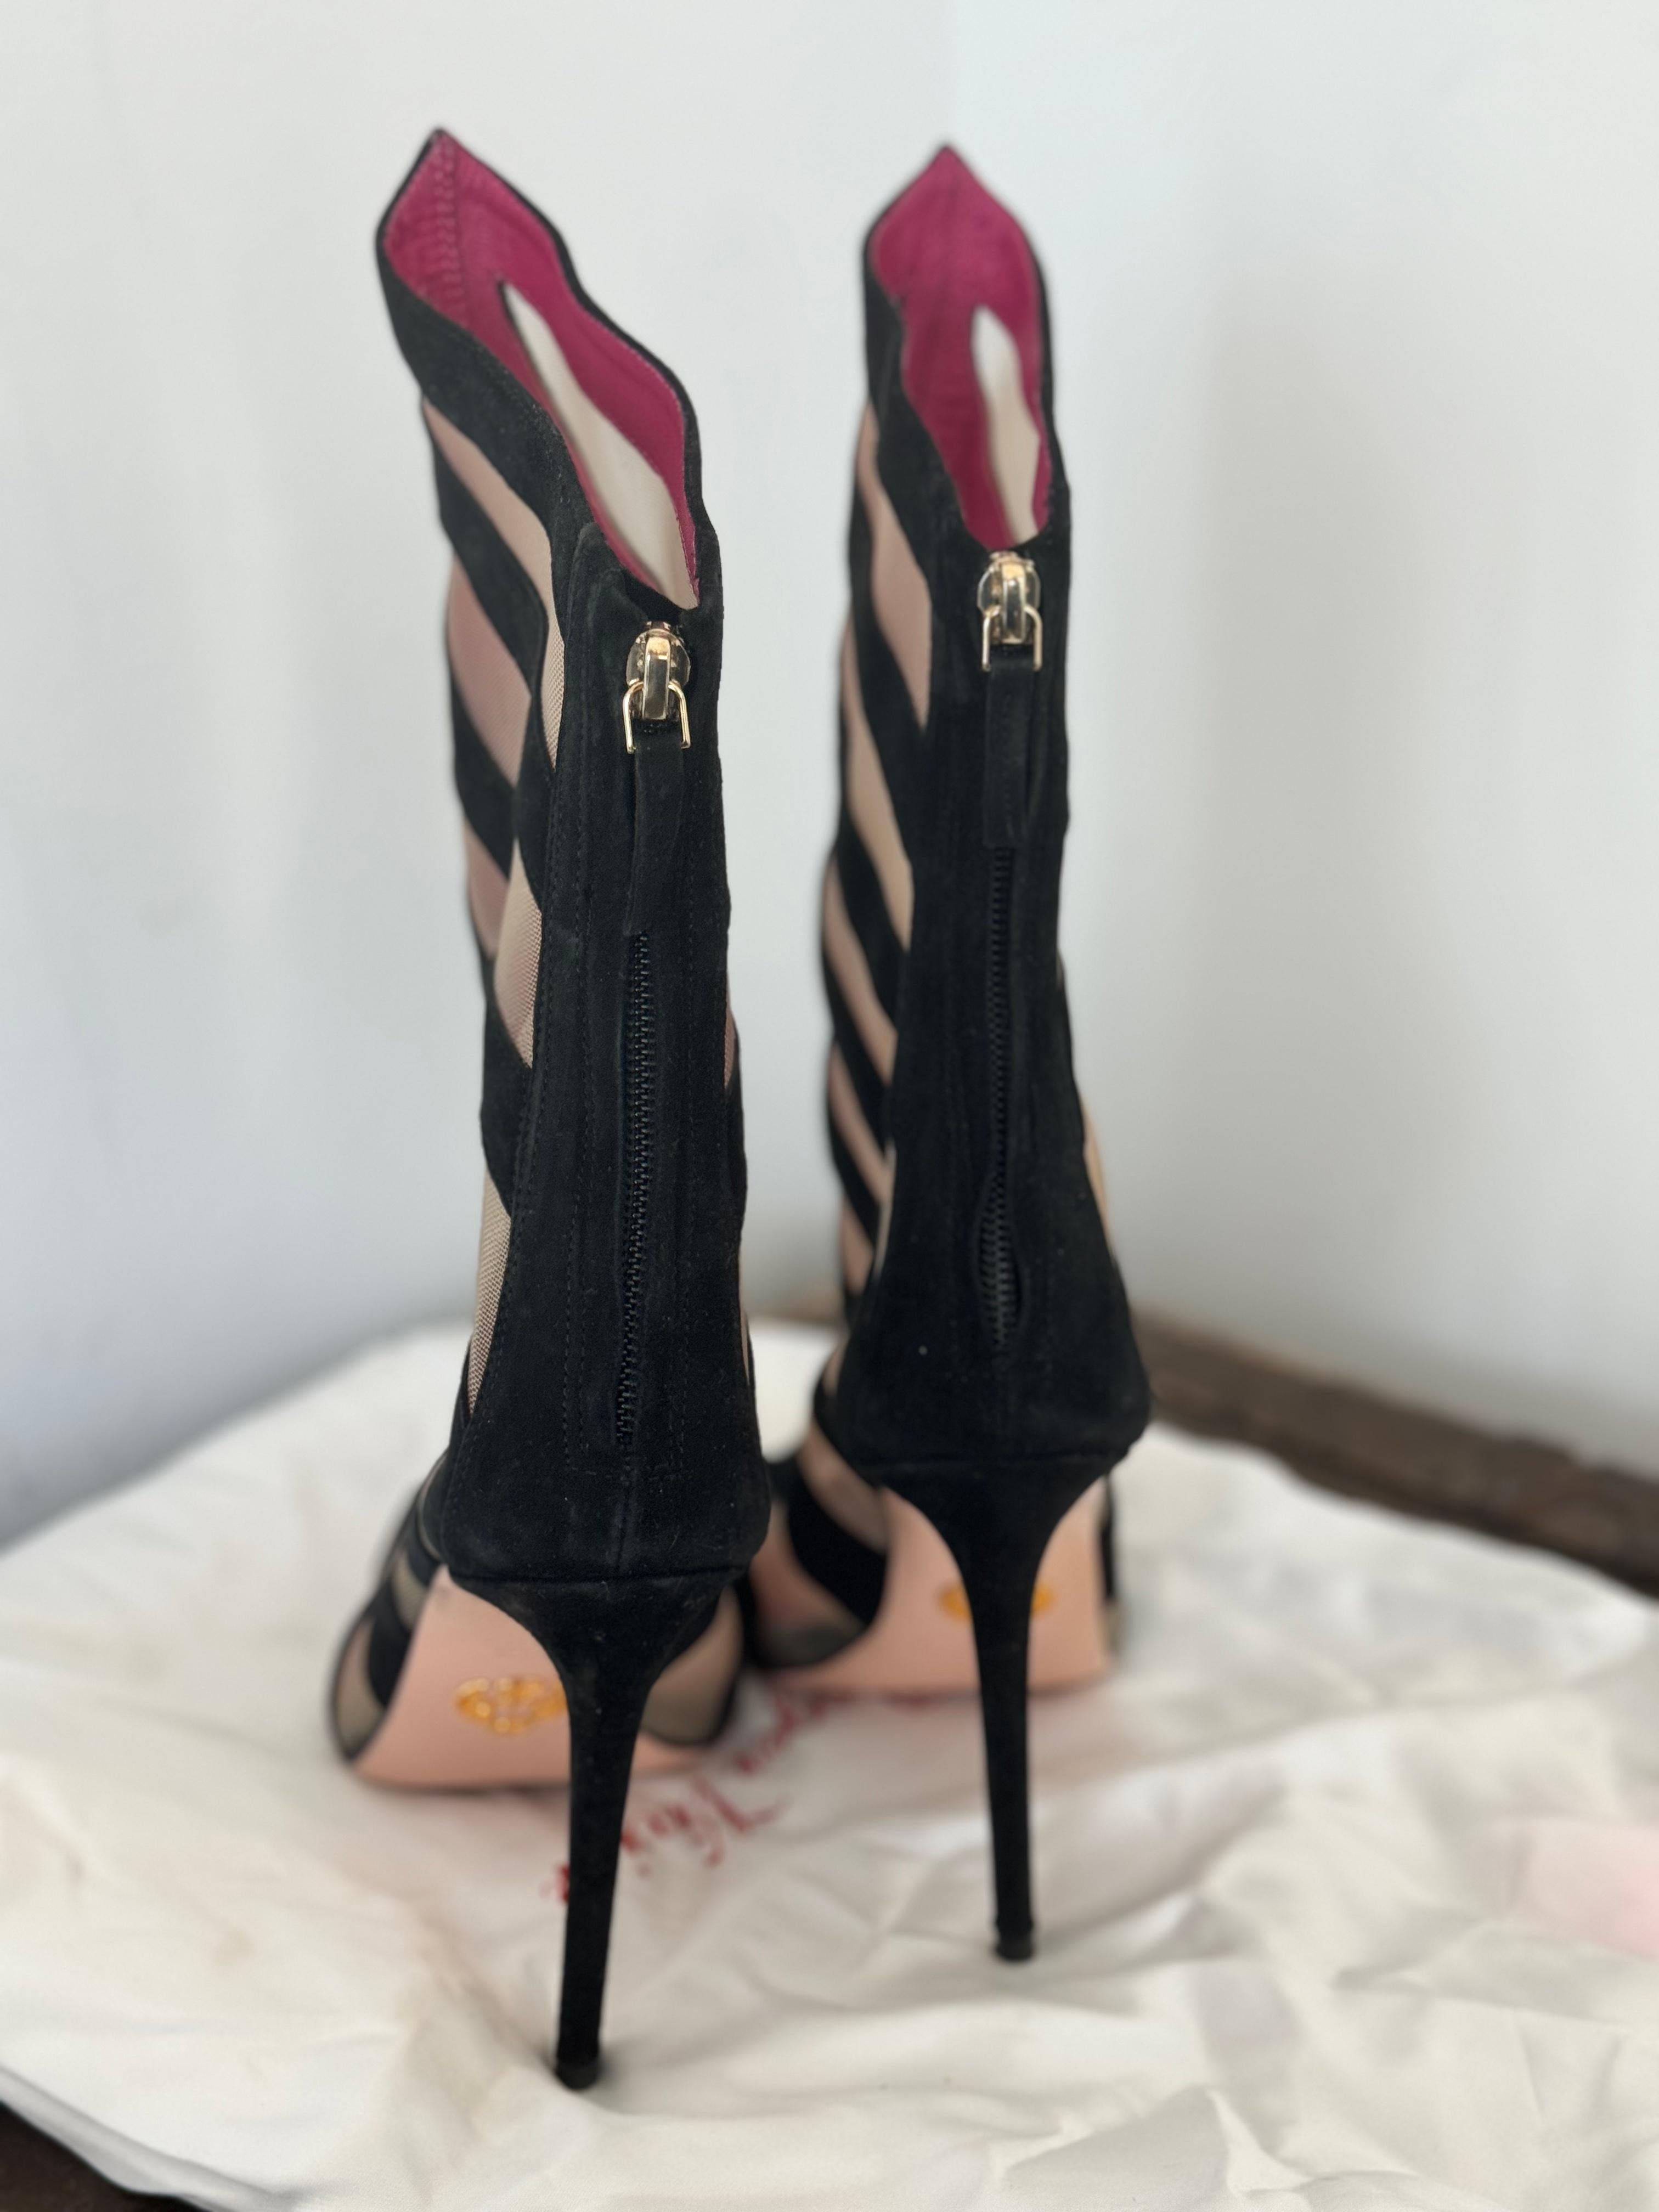 Oscar Tiye Mesh Boots with Black Suede and Fuchsia Lining leather In Good Condition For Sale In Toronto, CA